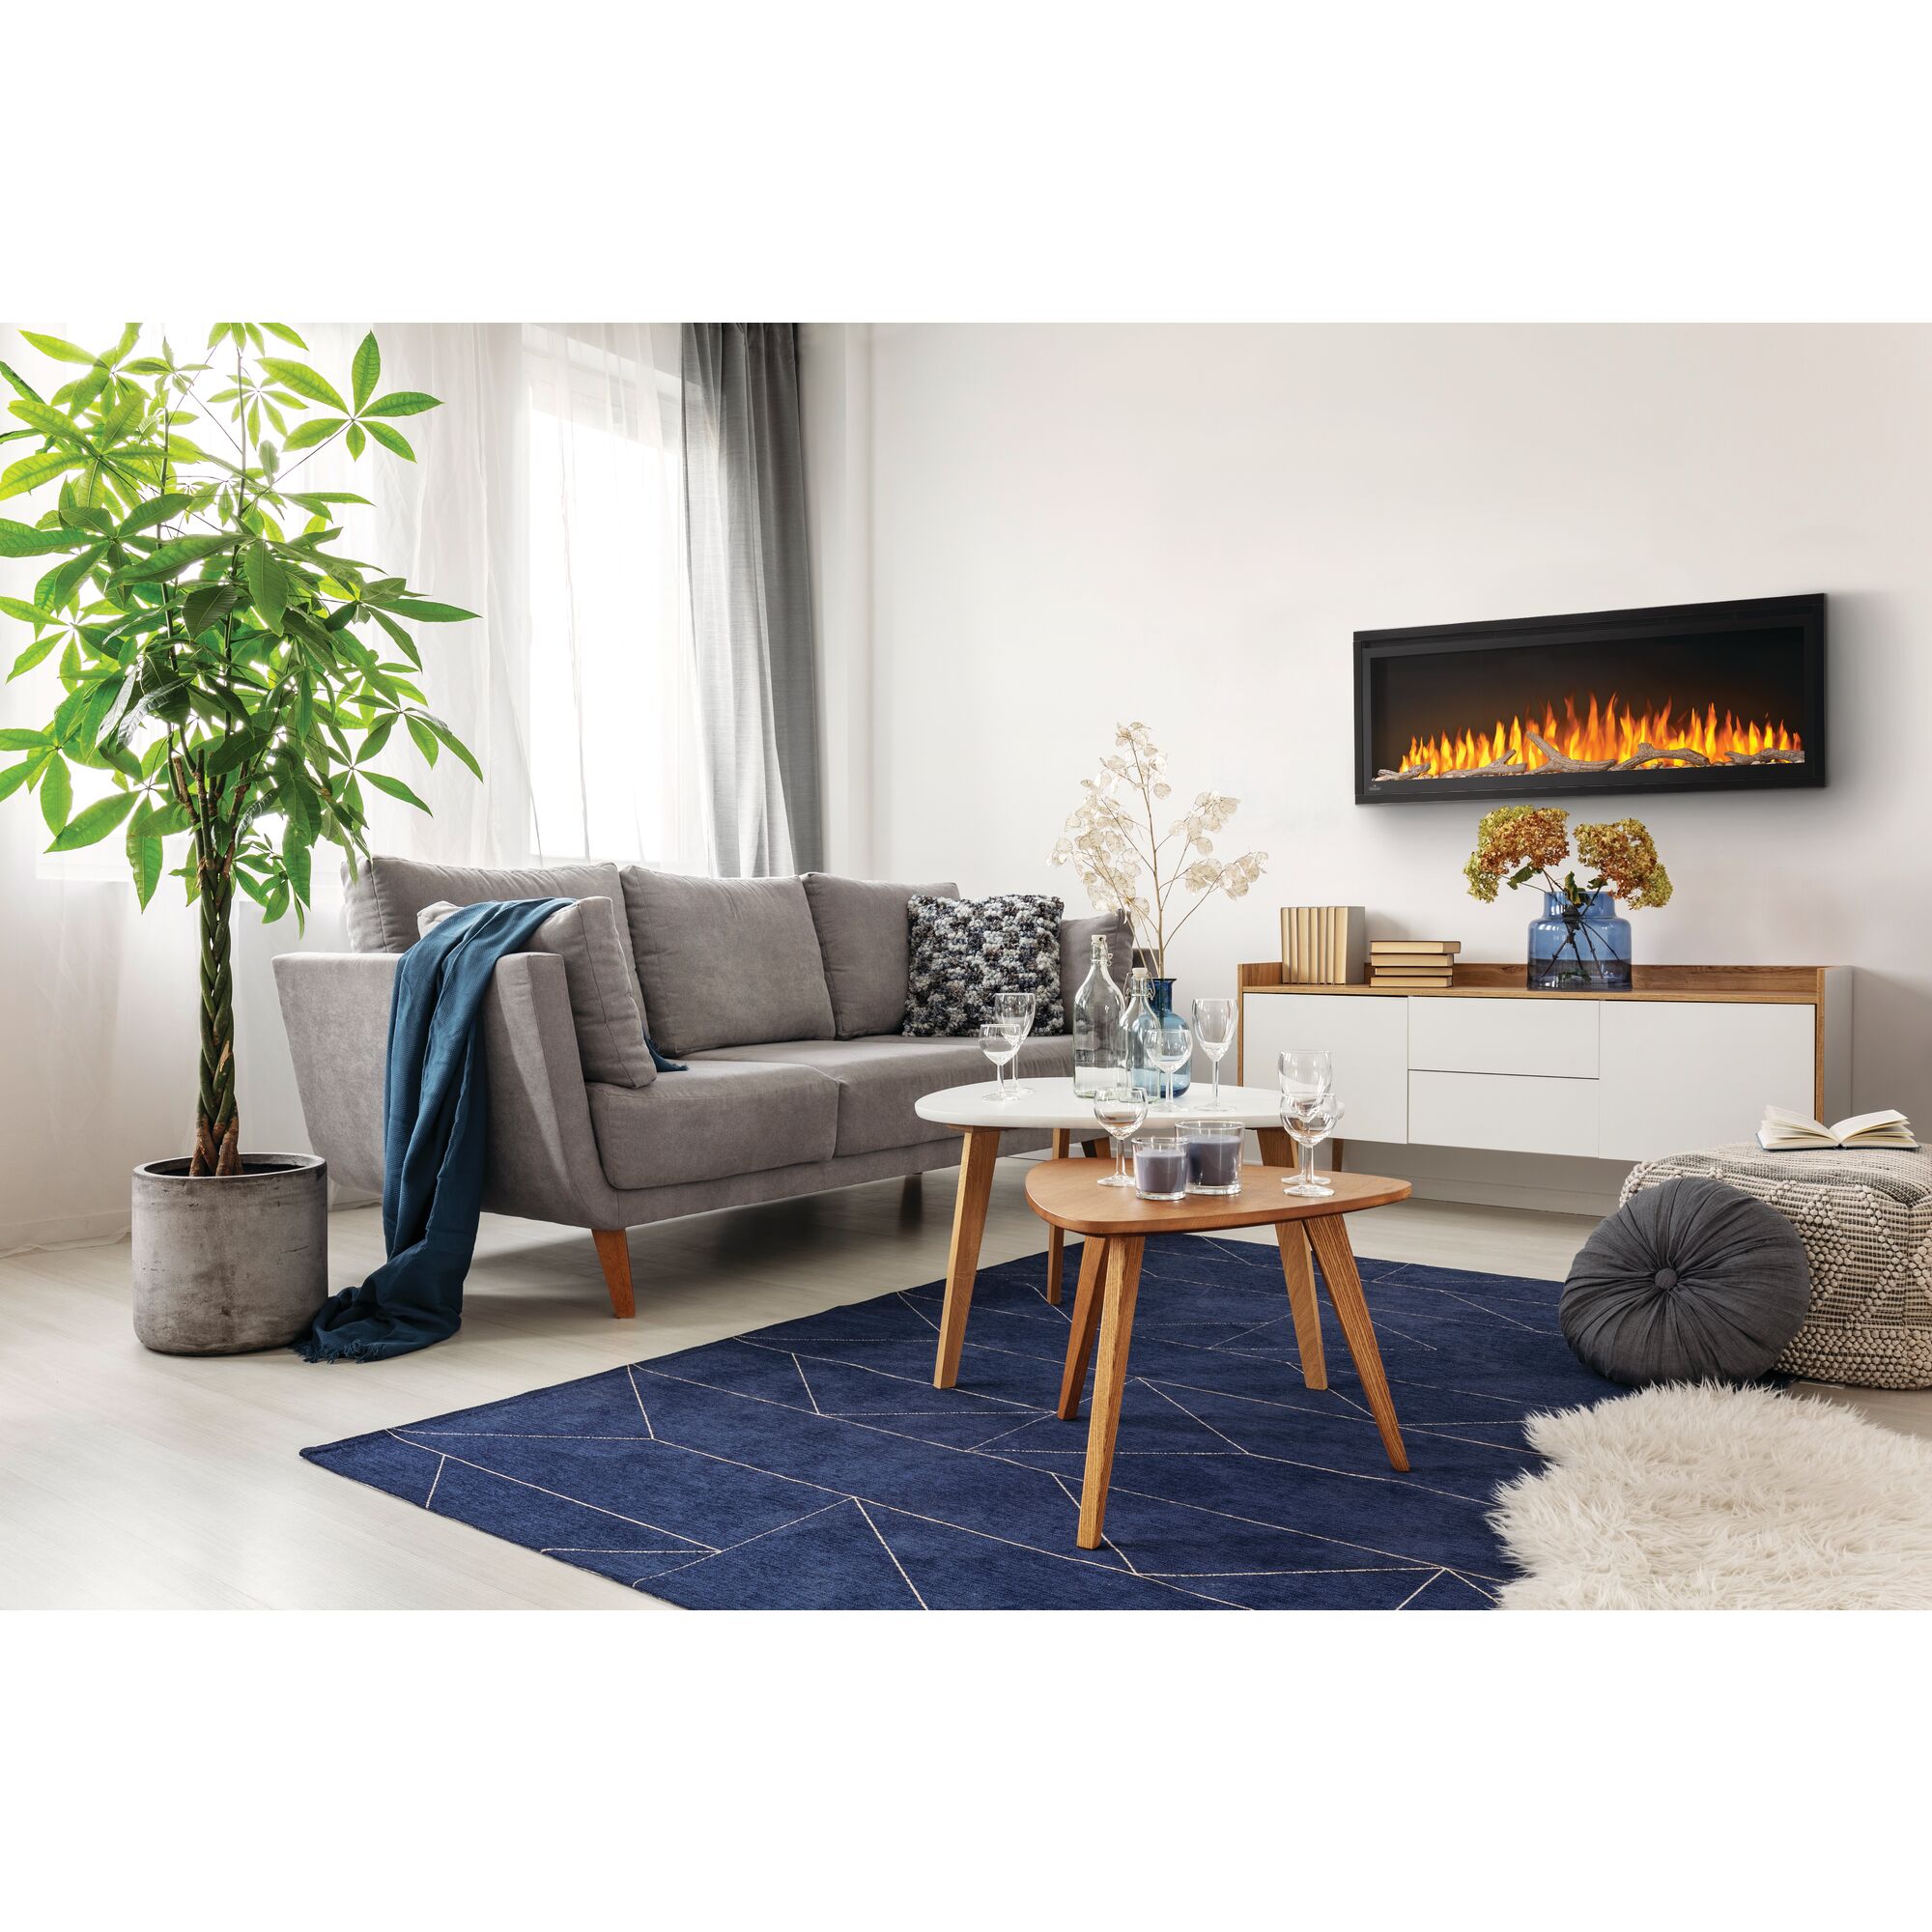 Image Napoleon Entice 36 inches eletric fireplace                                                                                                           